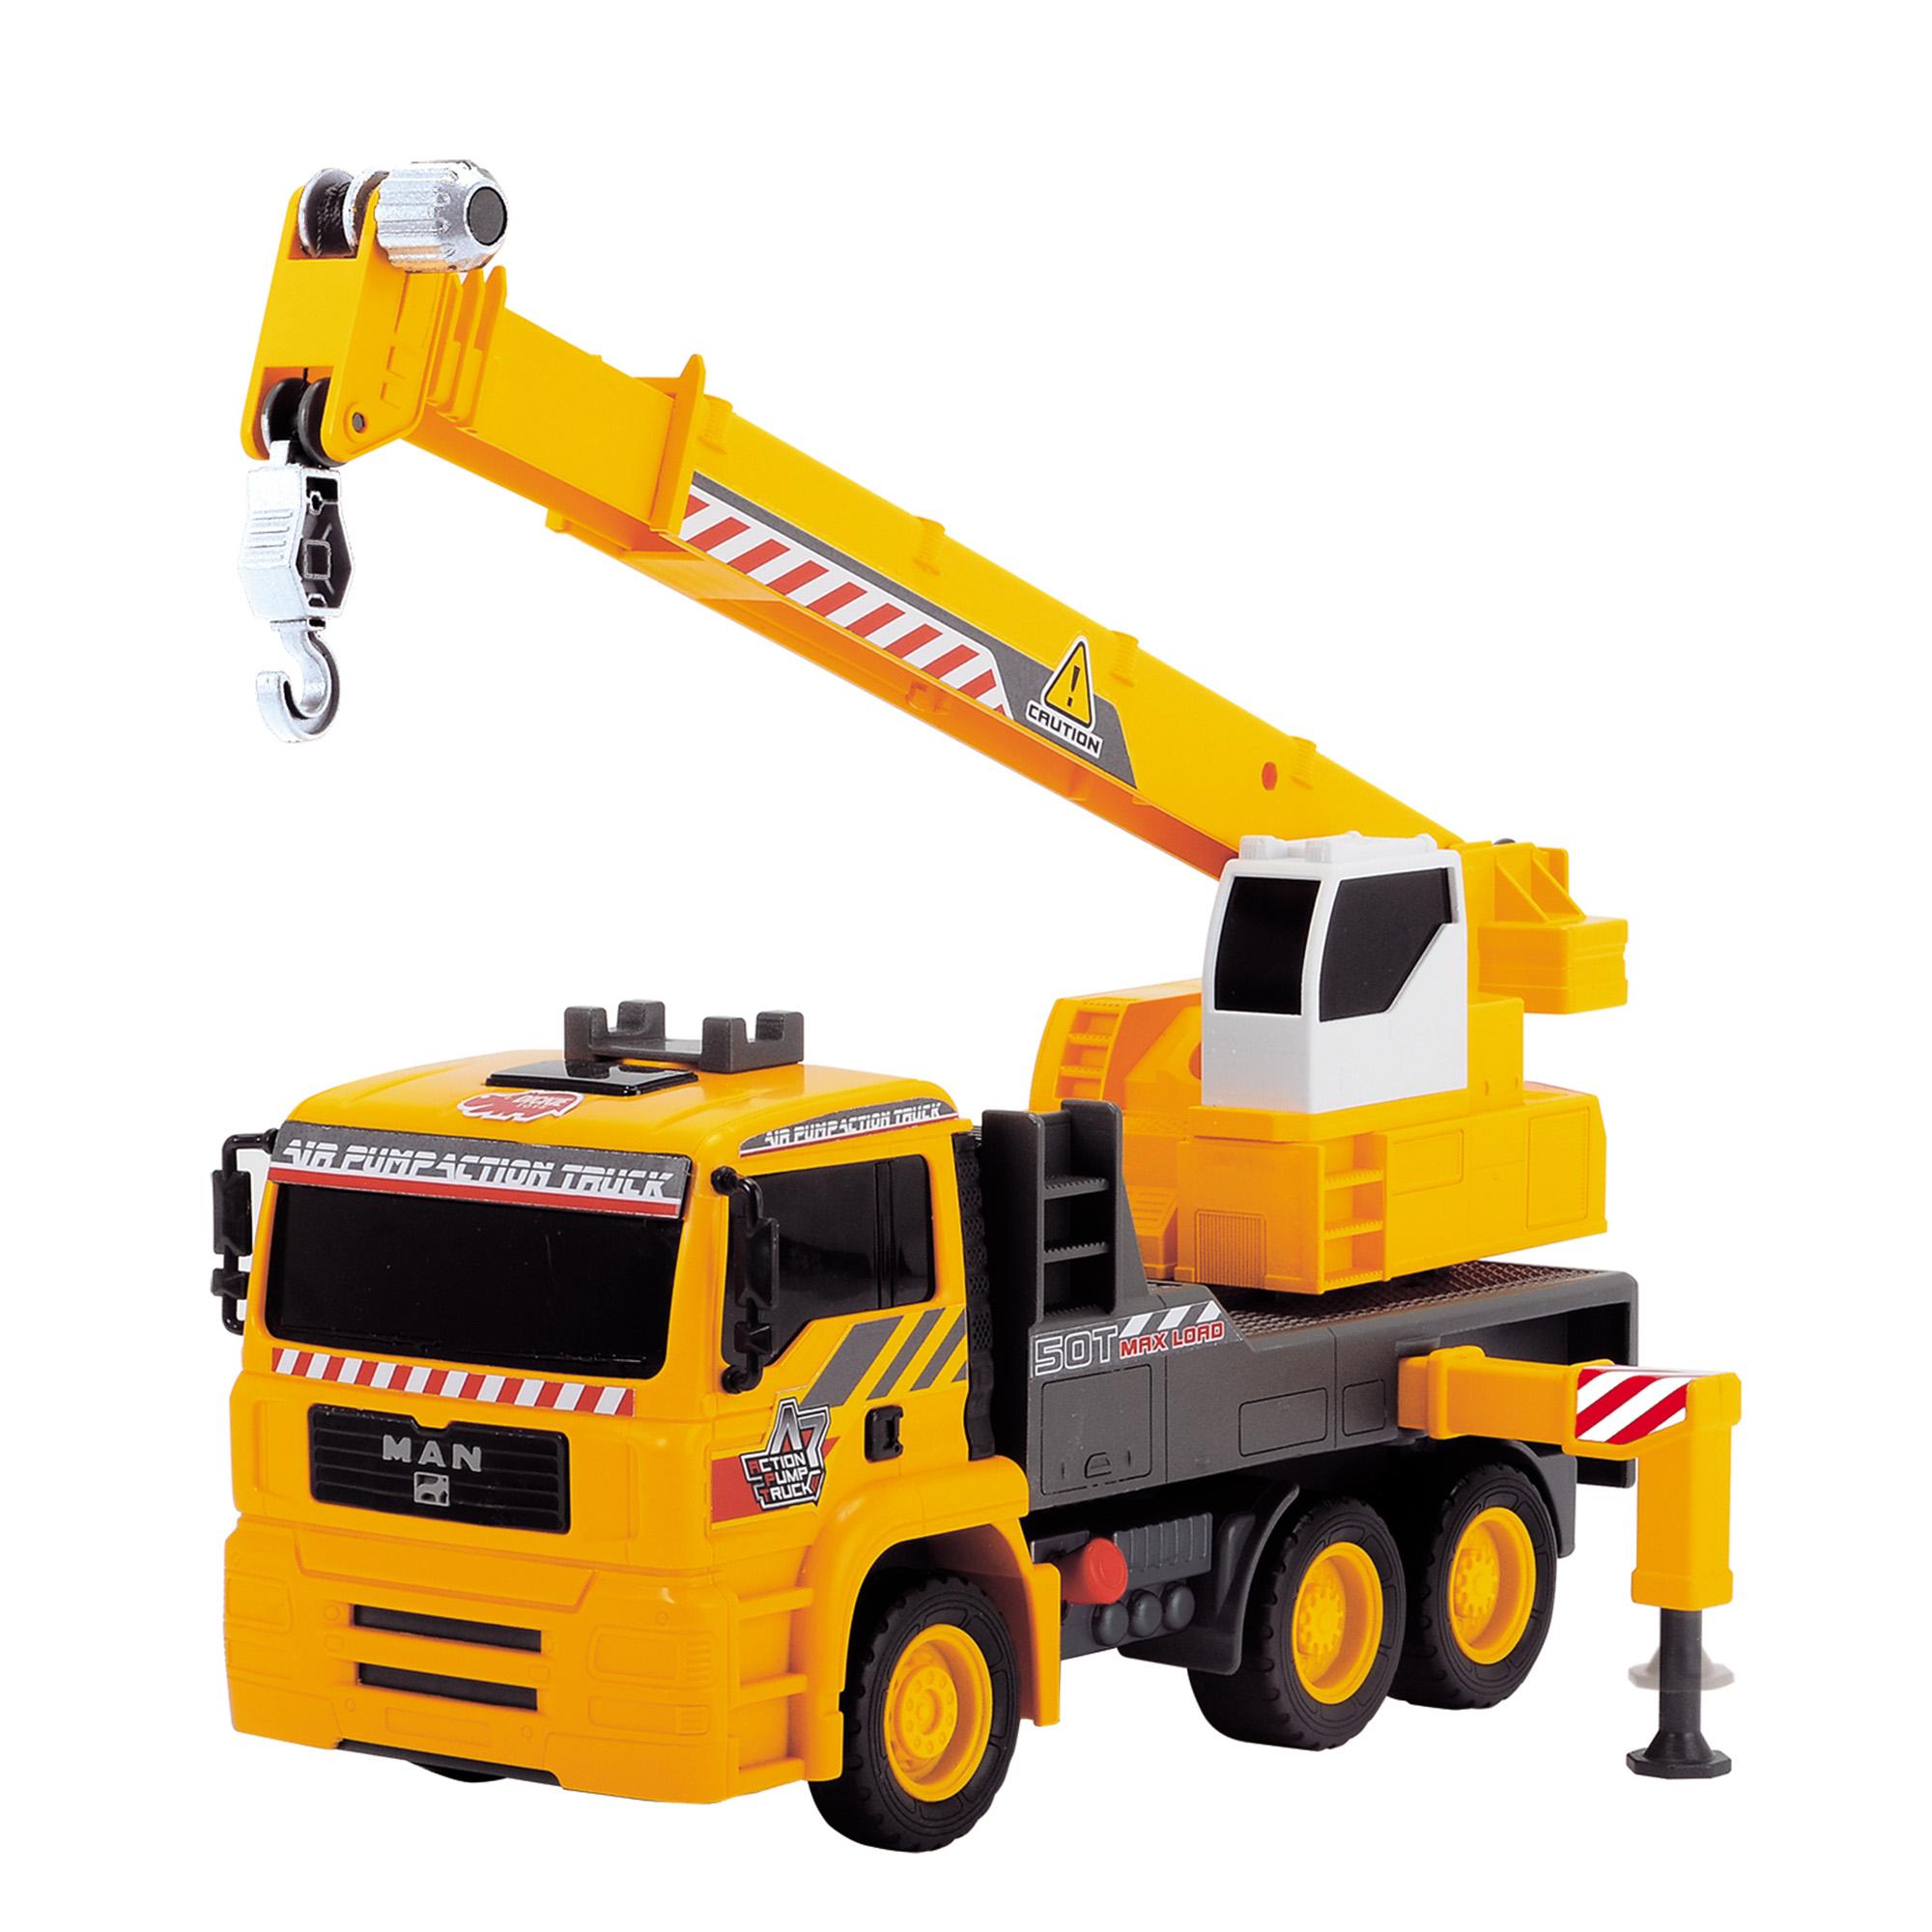 Driving Force Air Pump Mobile Crane - £24.00 - Hamleys for Toys and ...